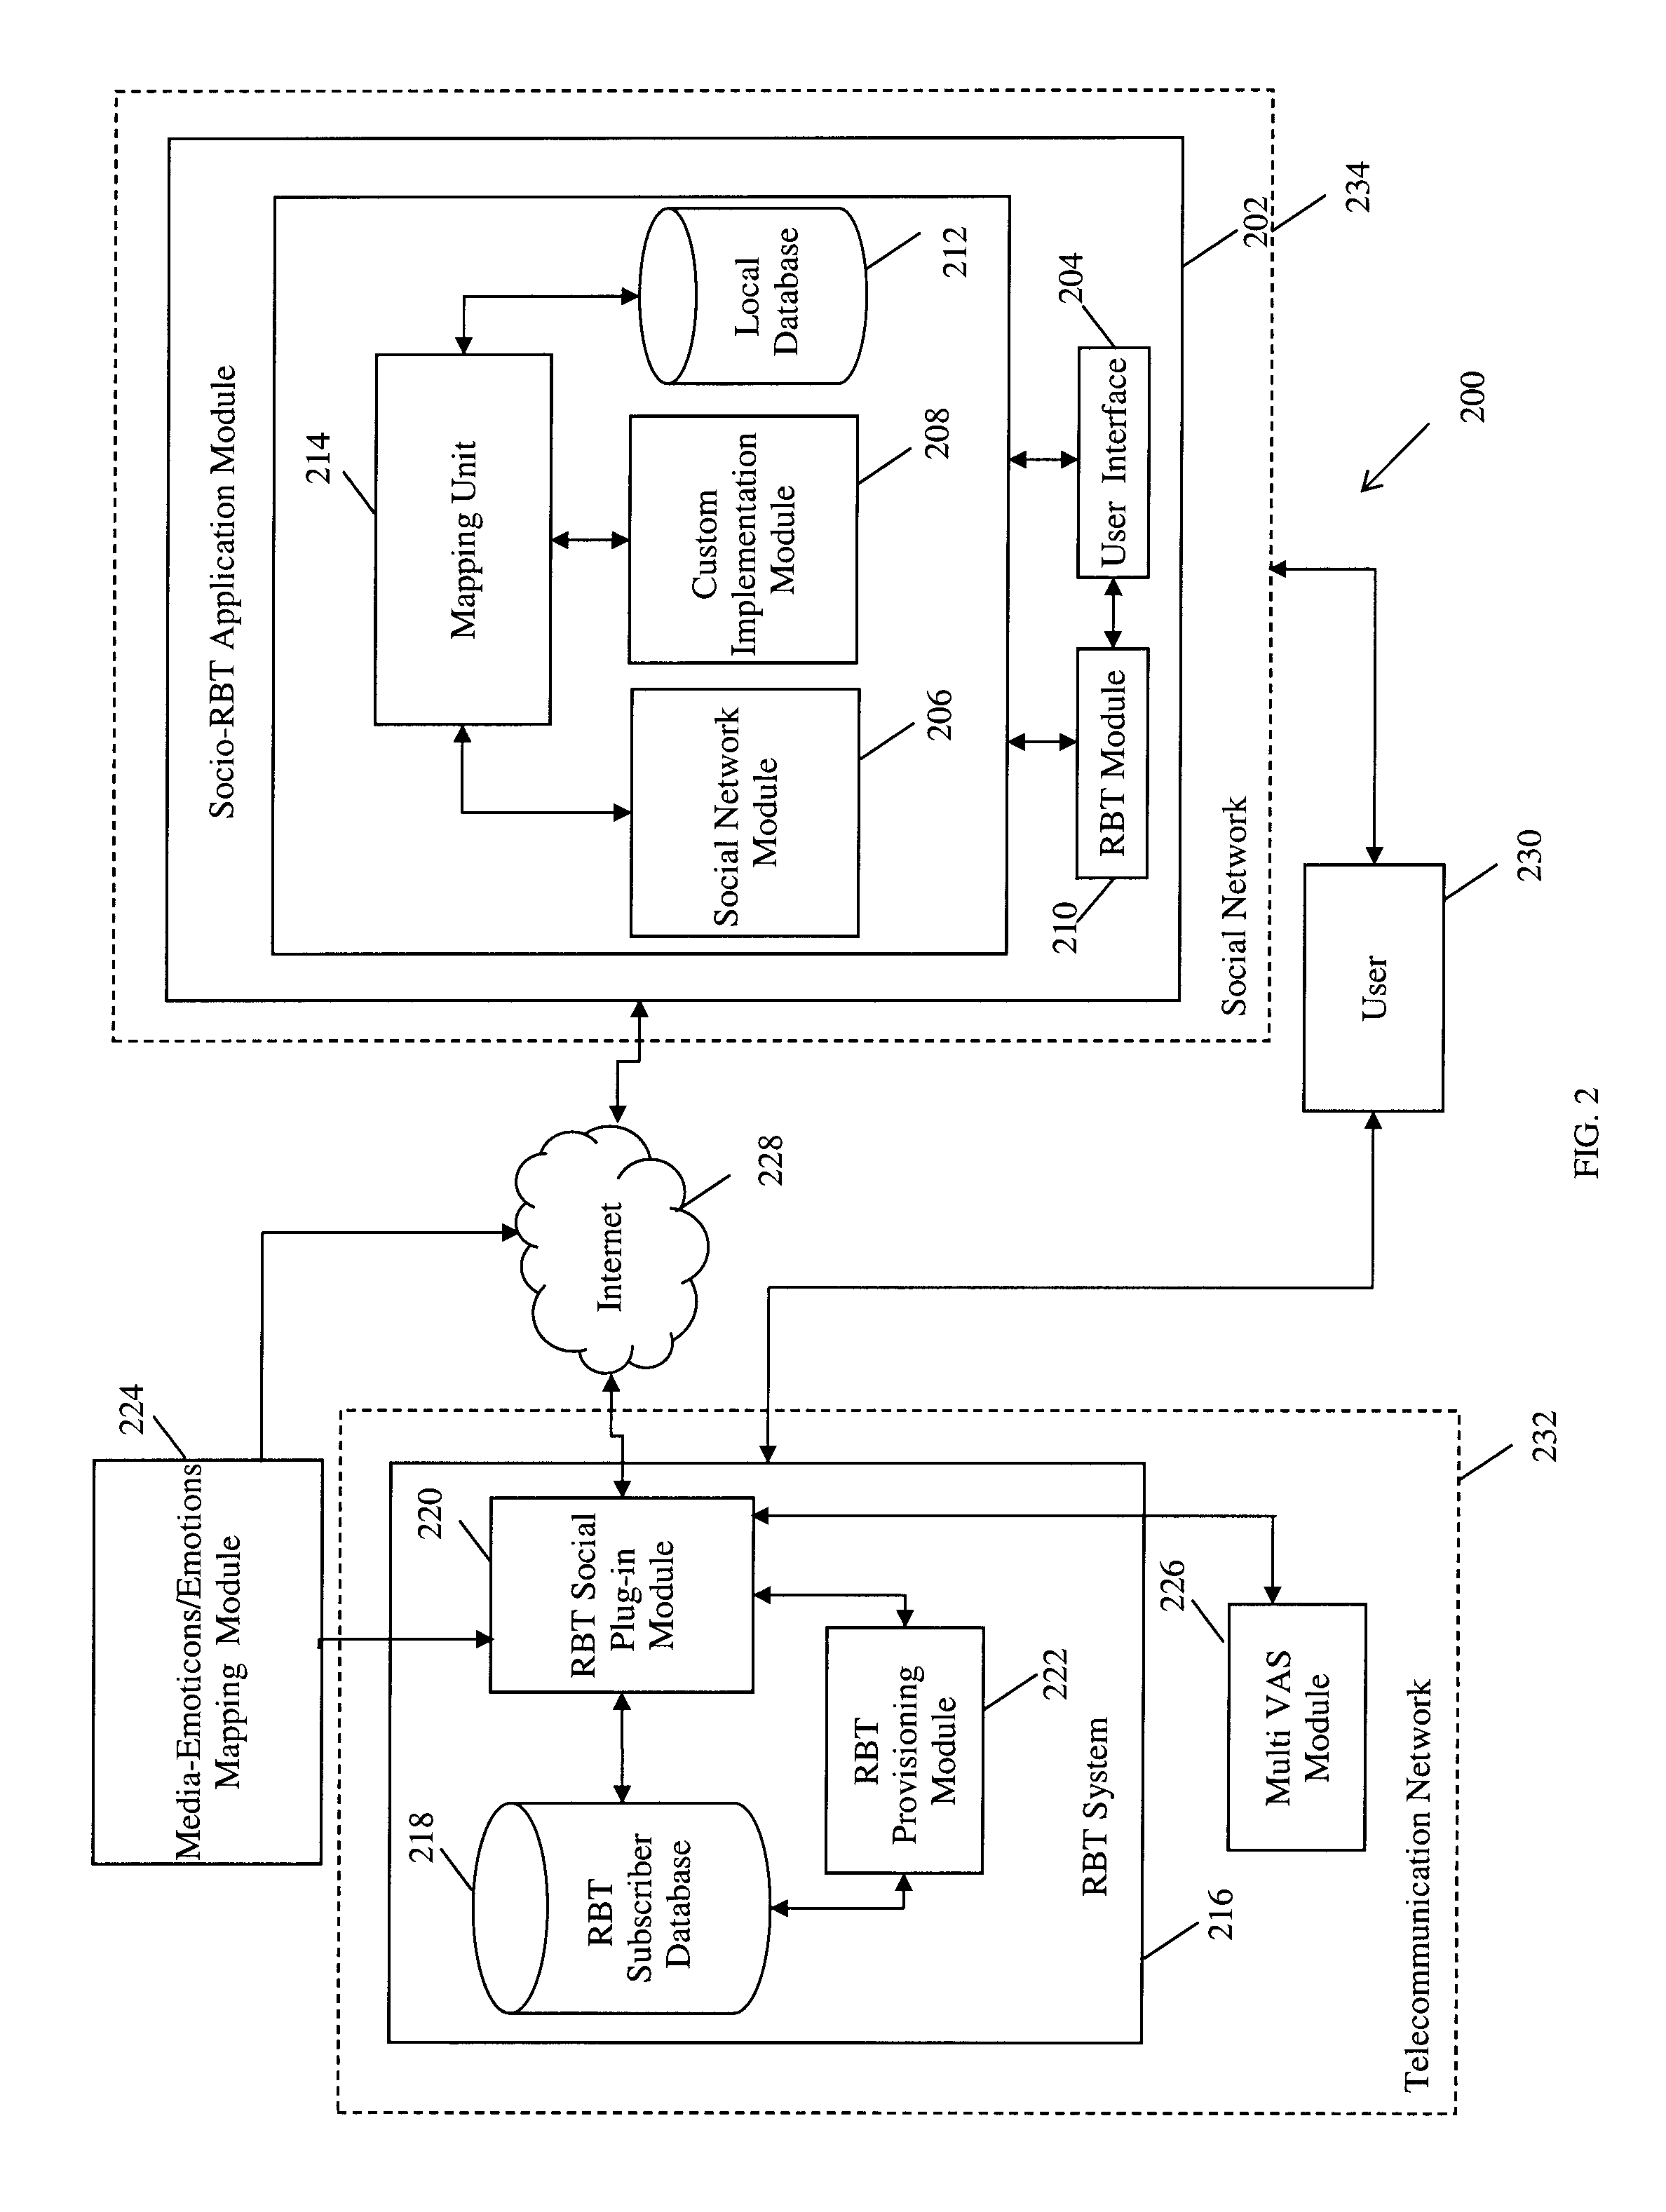 Method and system for updating social networking site with ring back tone information